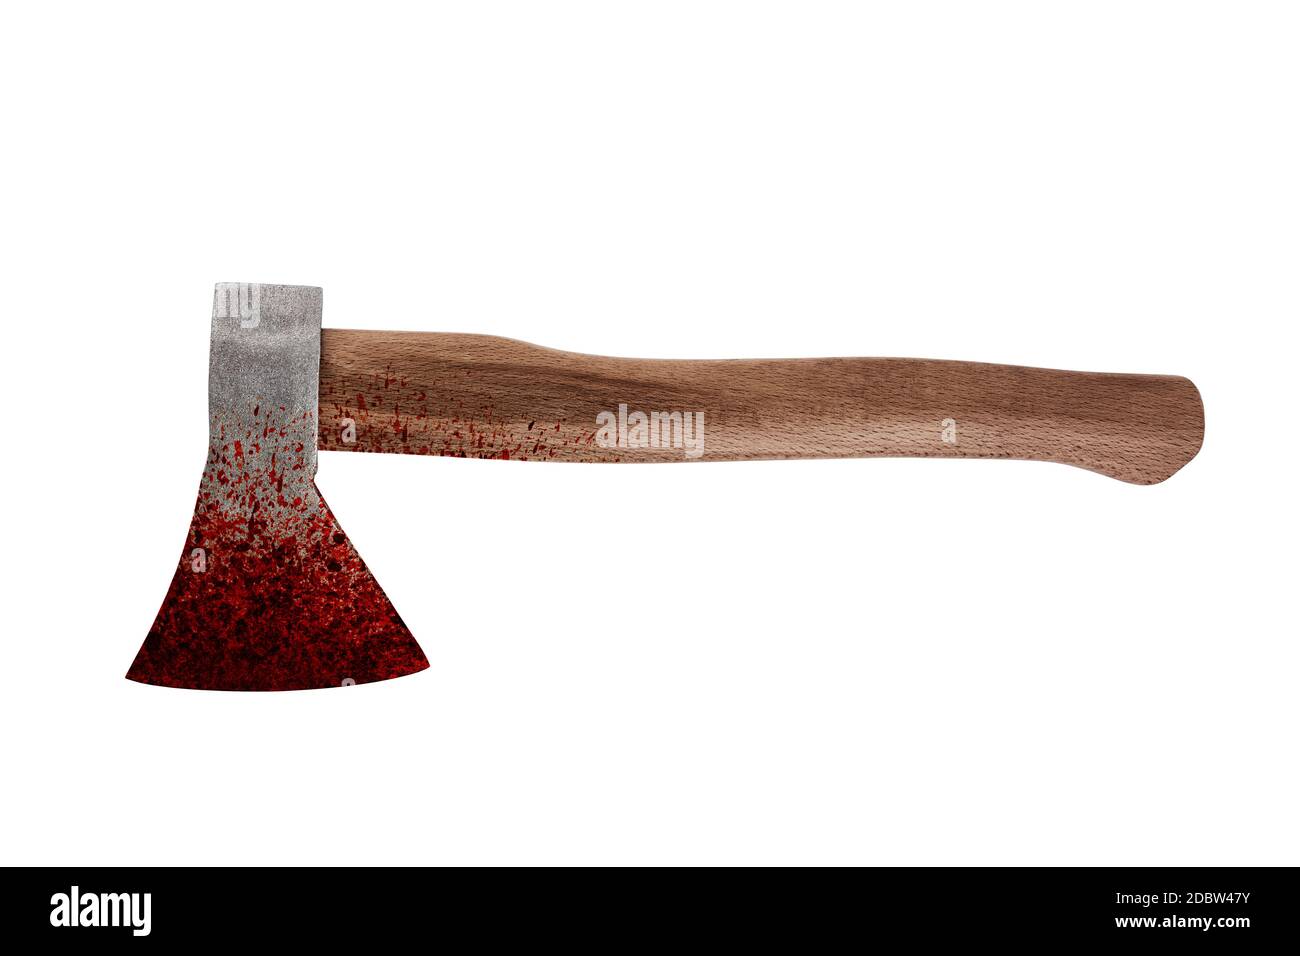 https://c8.alamy.com/comp/2DBW47Y/old-bloody-axe-isolated-on-white-background-with-cliiping-path-2DBW47Y.jpg